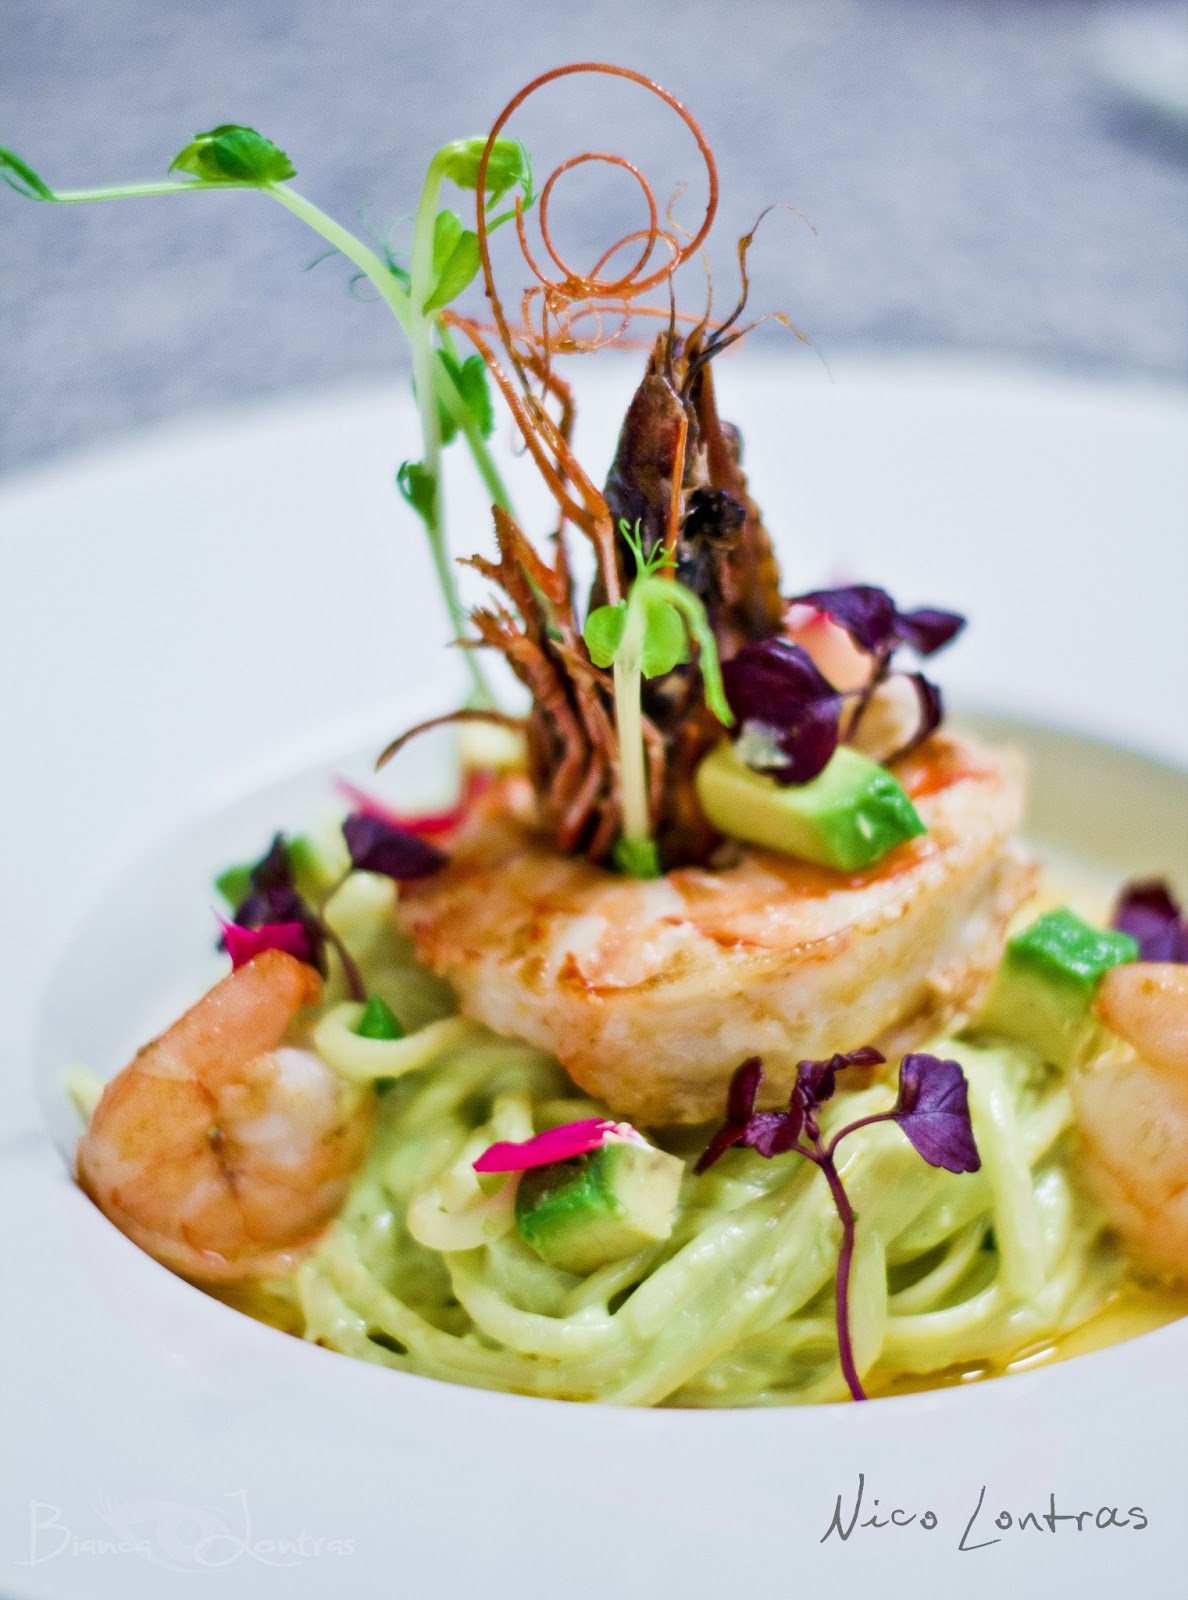 Cooking with Nico and Bianca: Linguine with avocado and Tiger Prawns